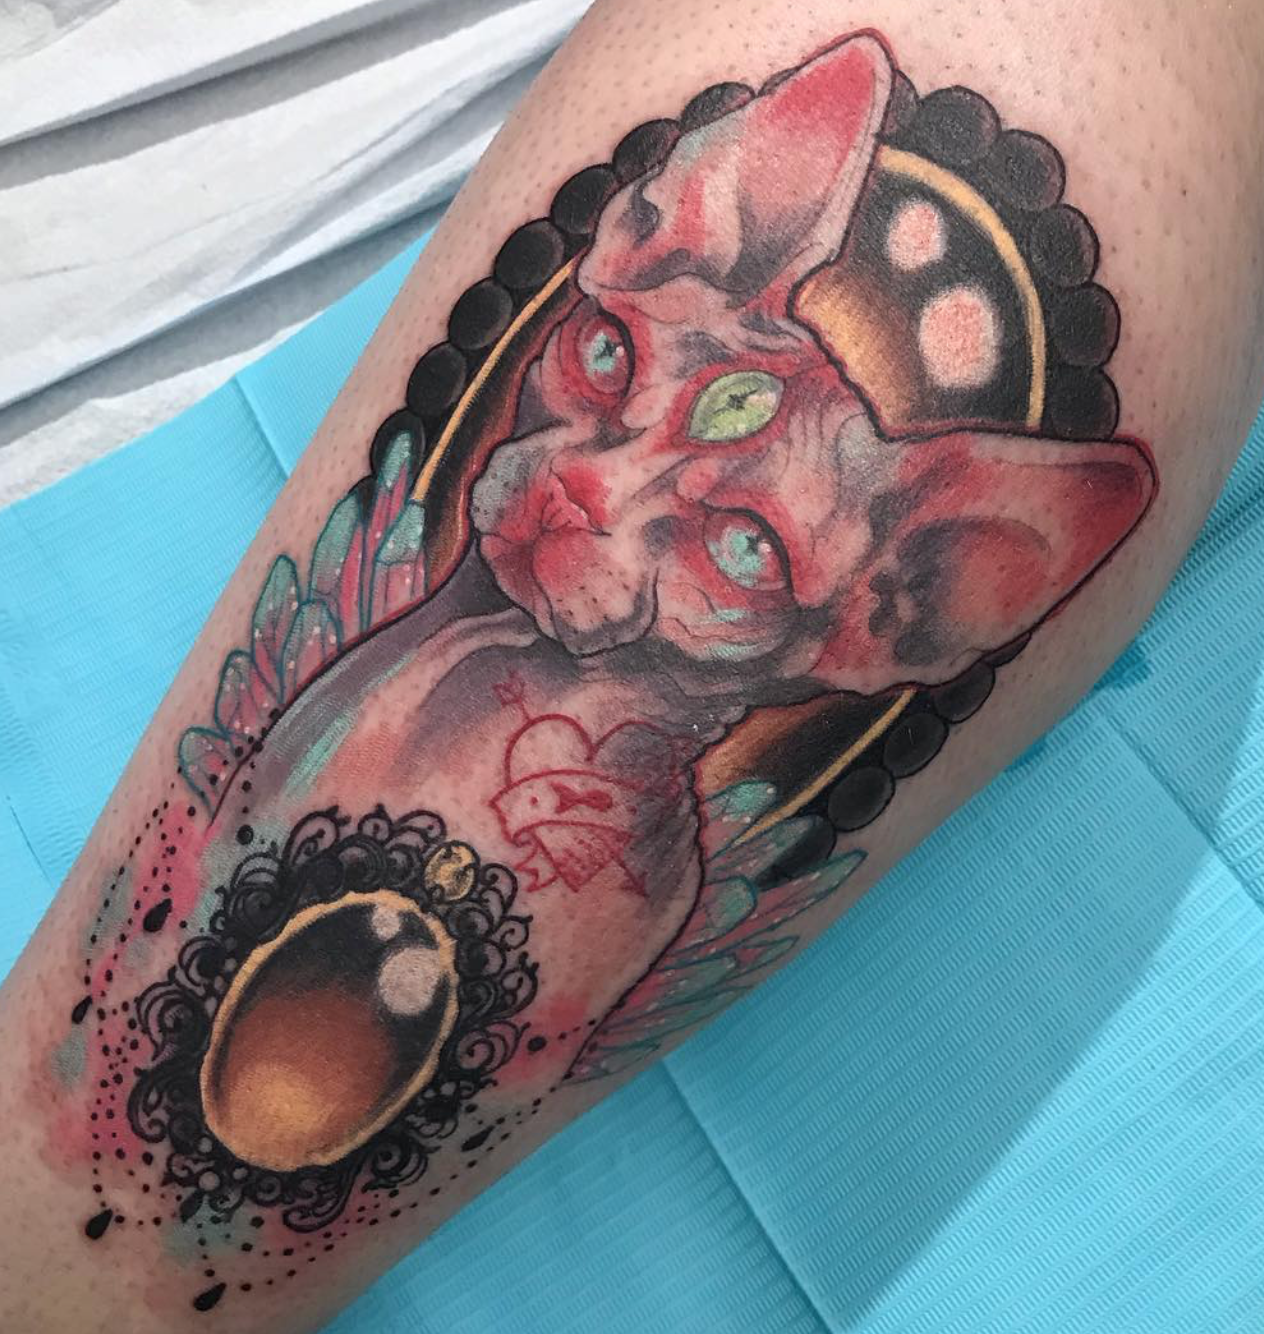 Hairless cat tattoo by Kate Erso